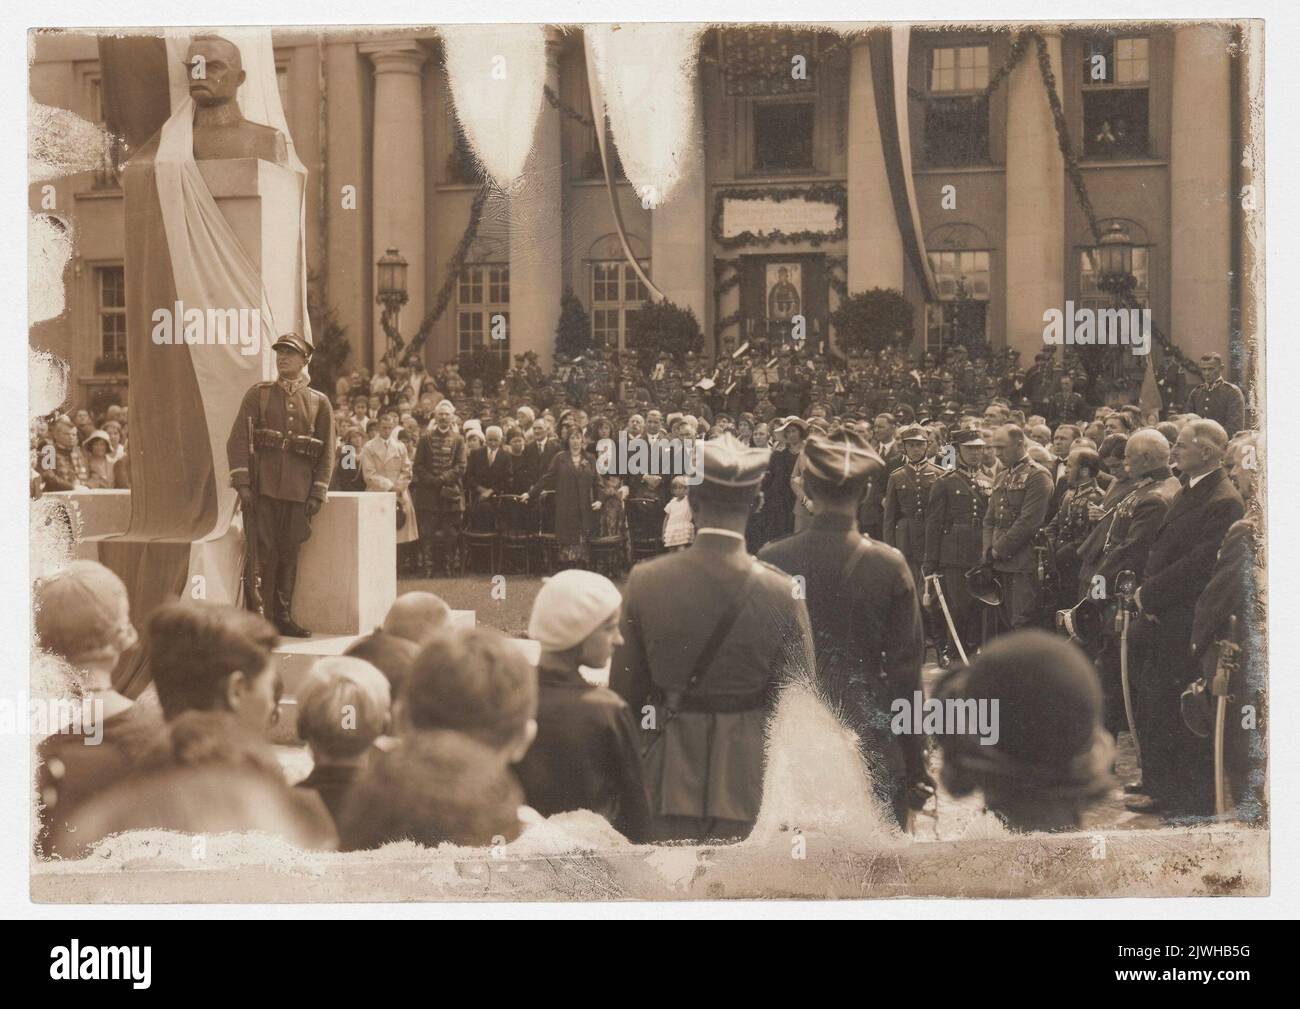 Unveiling event of the Józef Piłsudski monument, with the bust of Marshall sculpted by Olga Niewska, in front of the Greater Polish Infantry Cadet School in Bydgoszcz. Pikiel, Witold (1895-1943), photographer Stock Photo